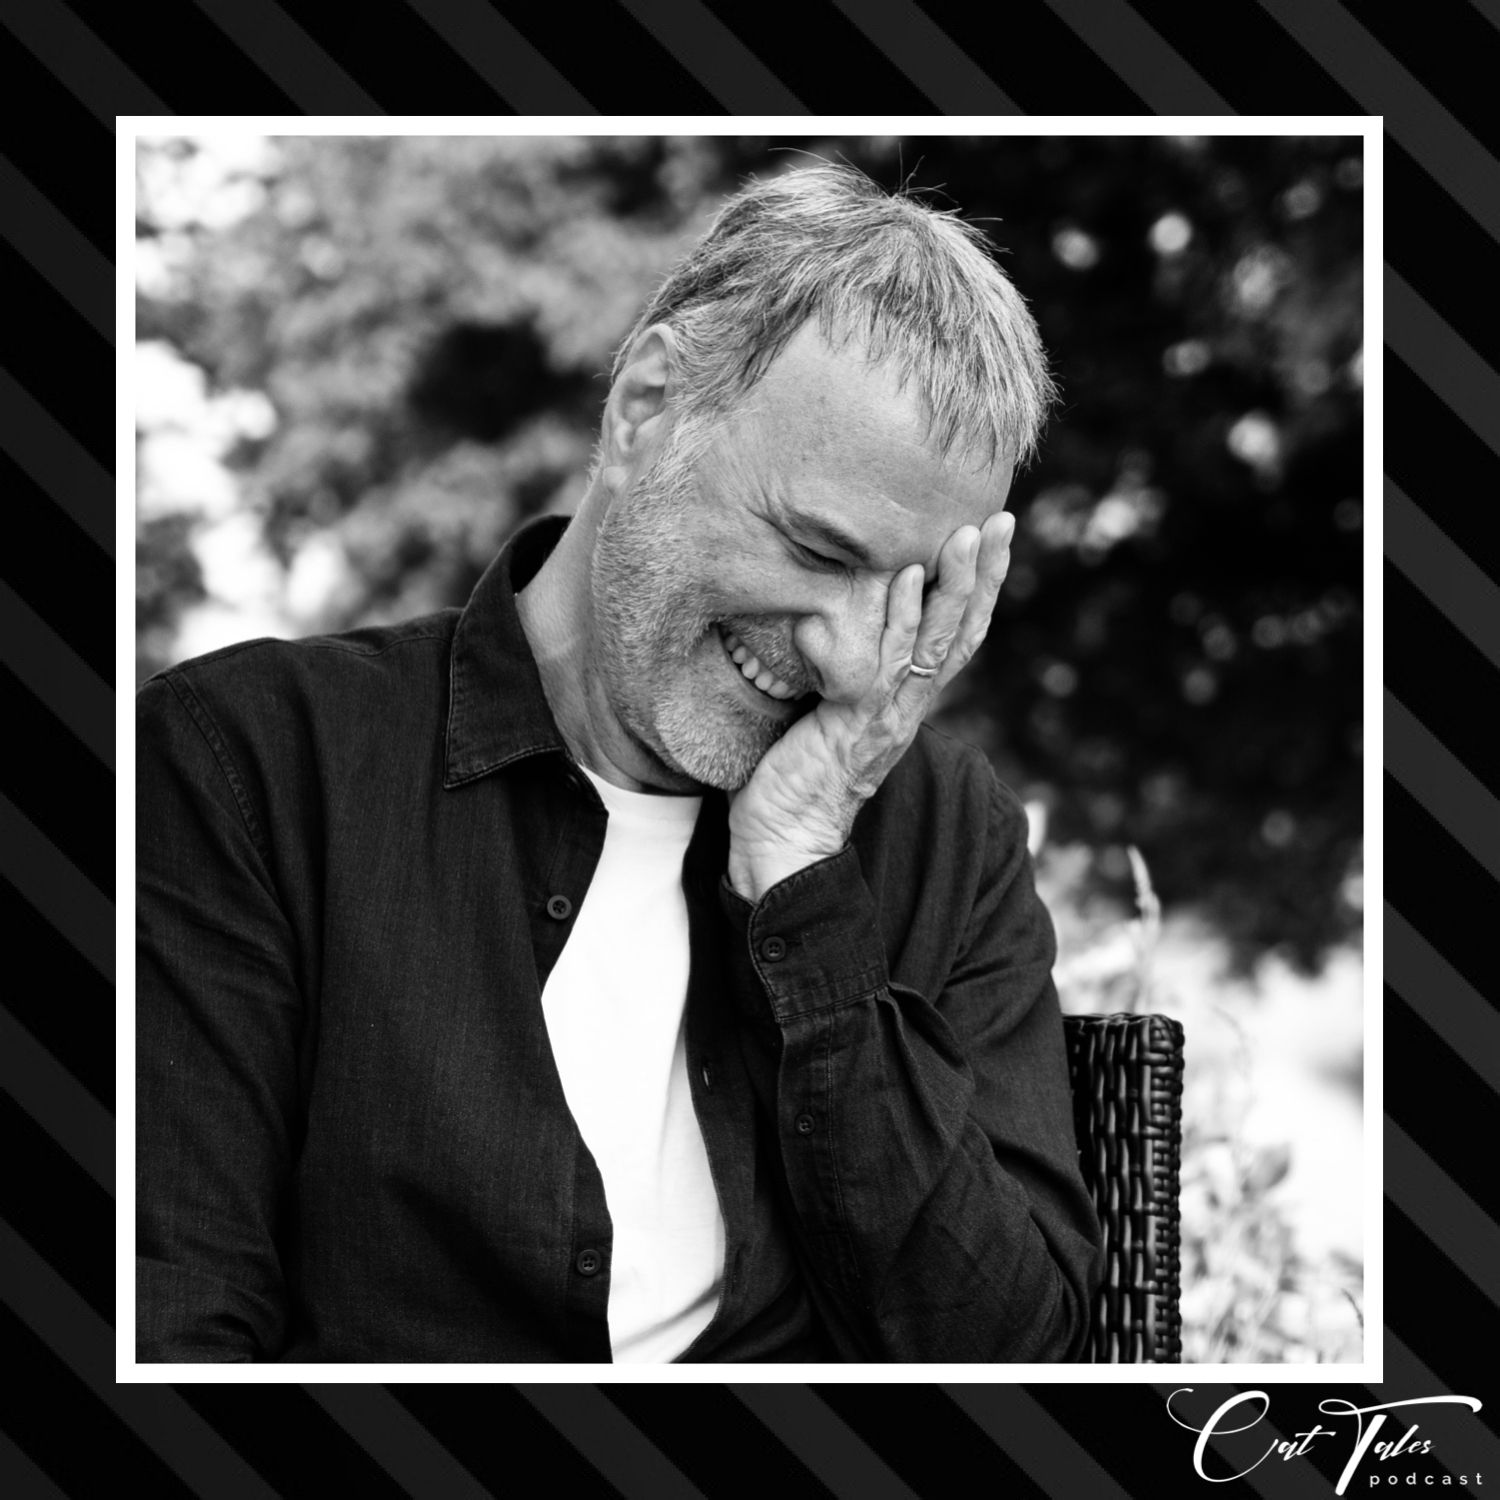 109: The one with Steve Harley Image